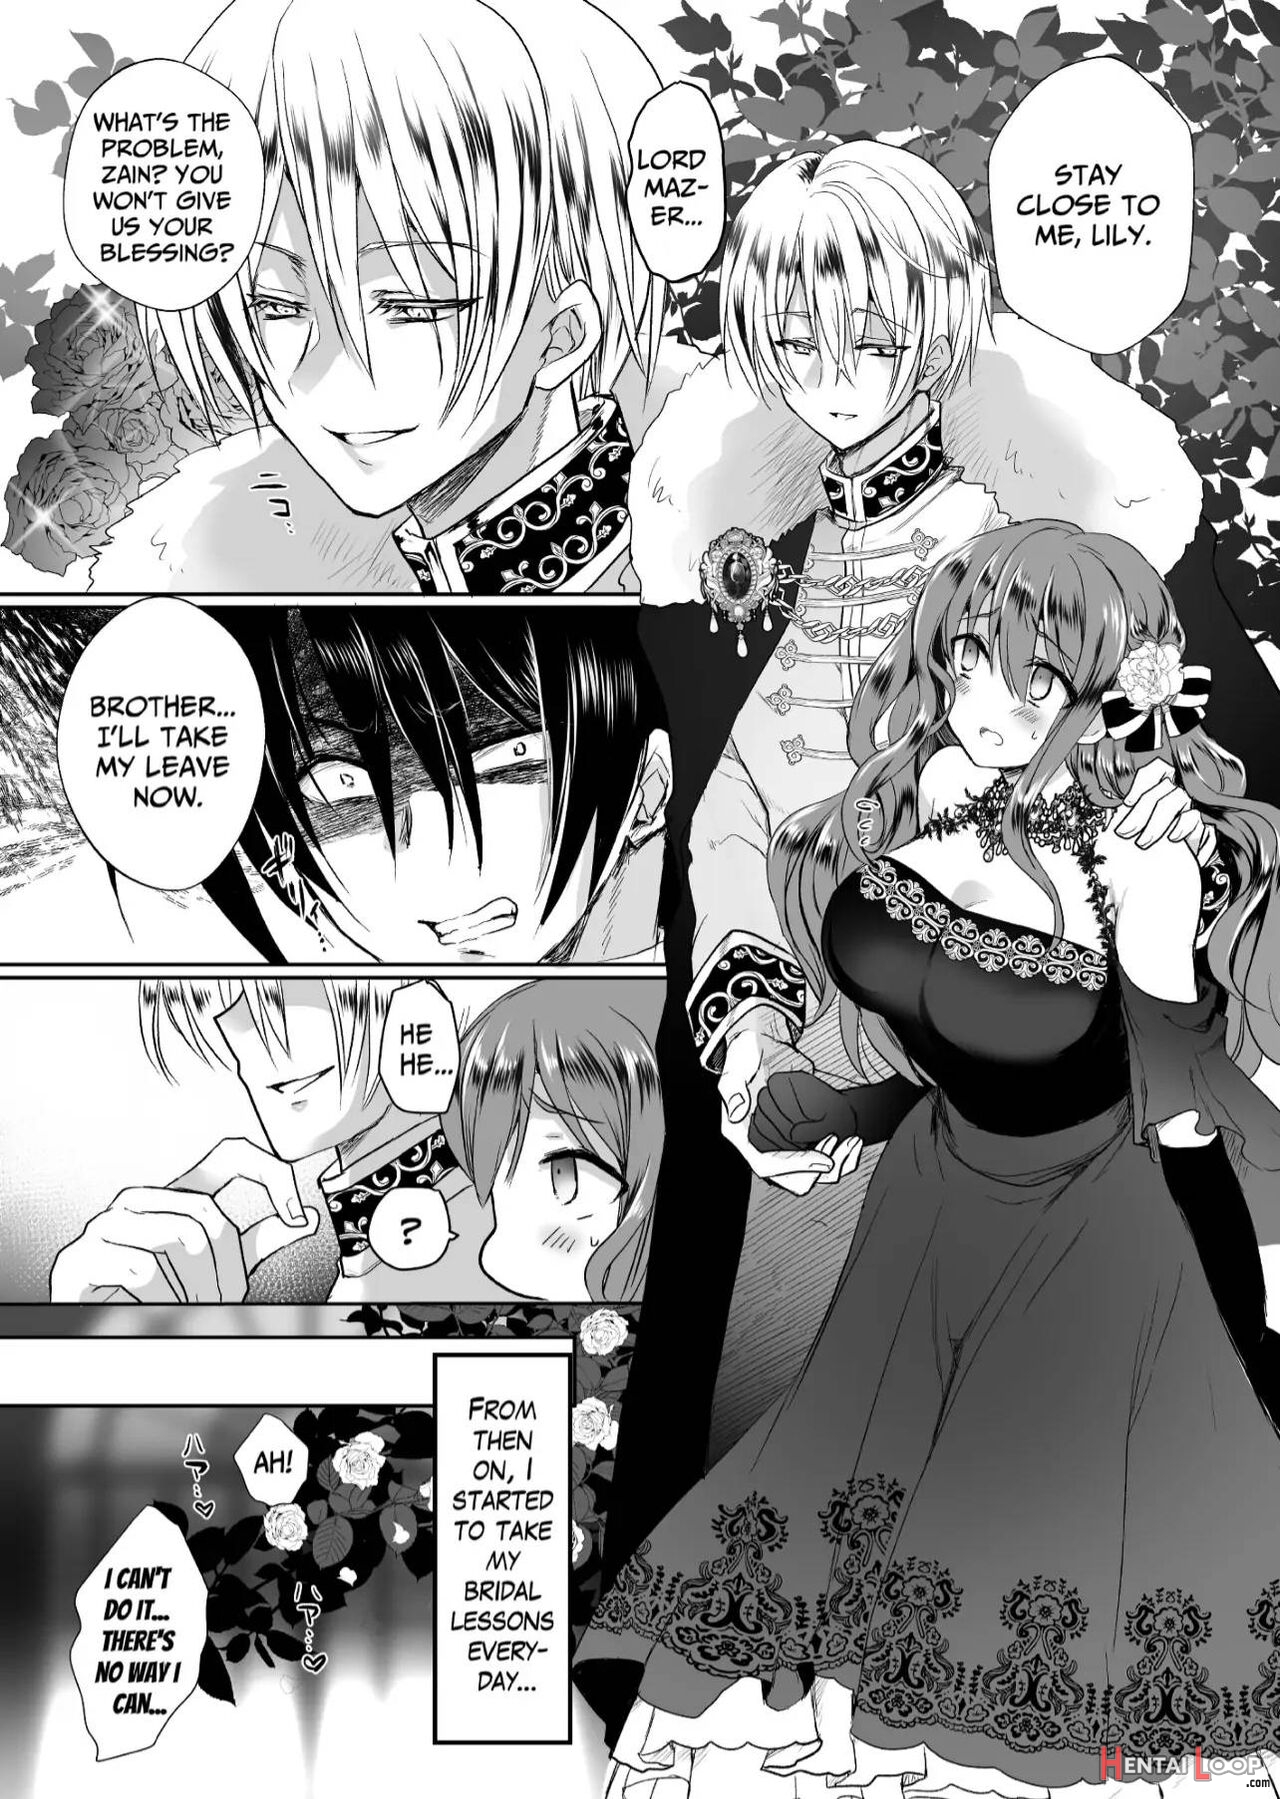  jk's Tragic Isekai Reincarnation As The Villainess ~but My Precious Side Character!~ 2 page 8